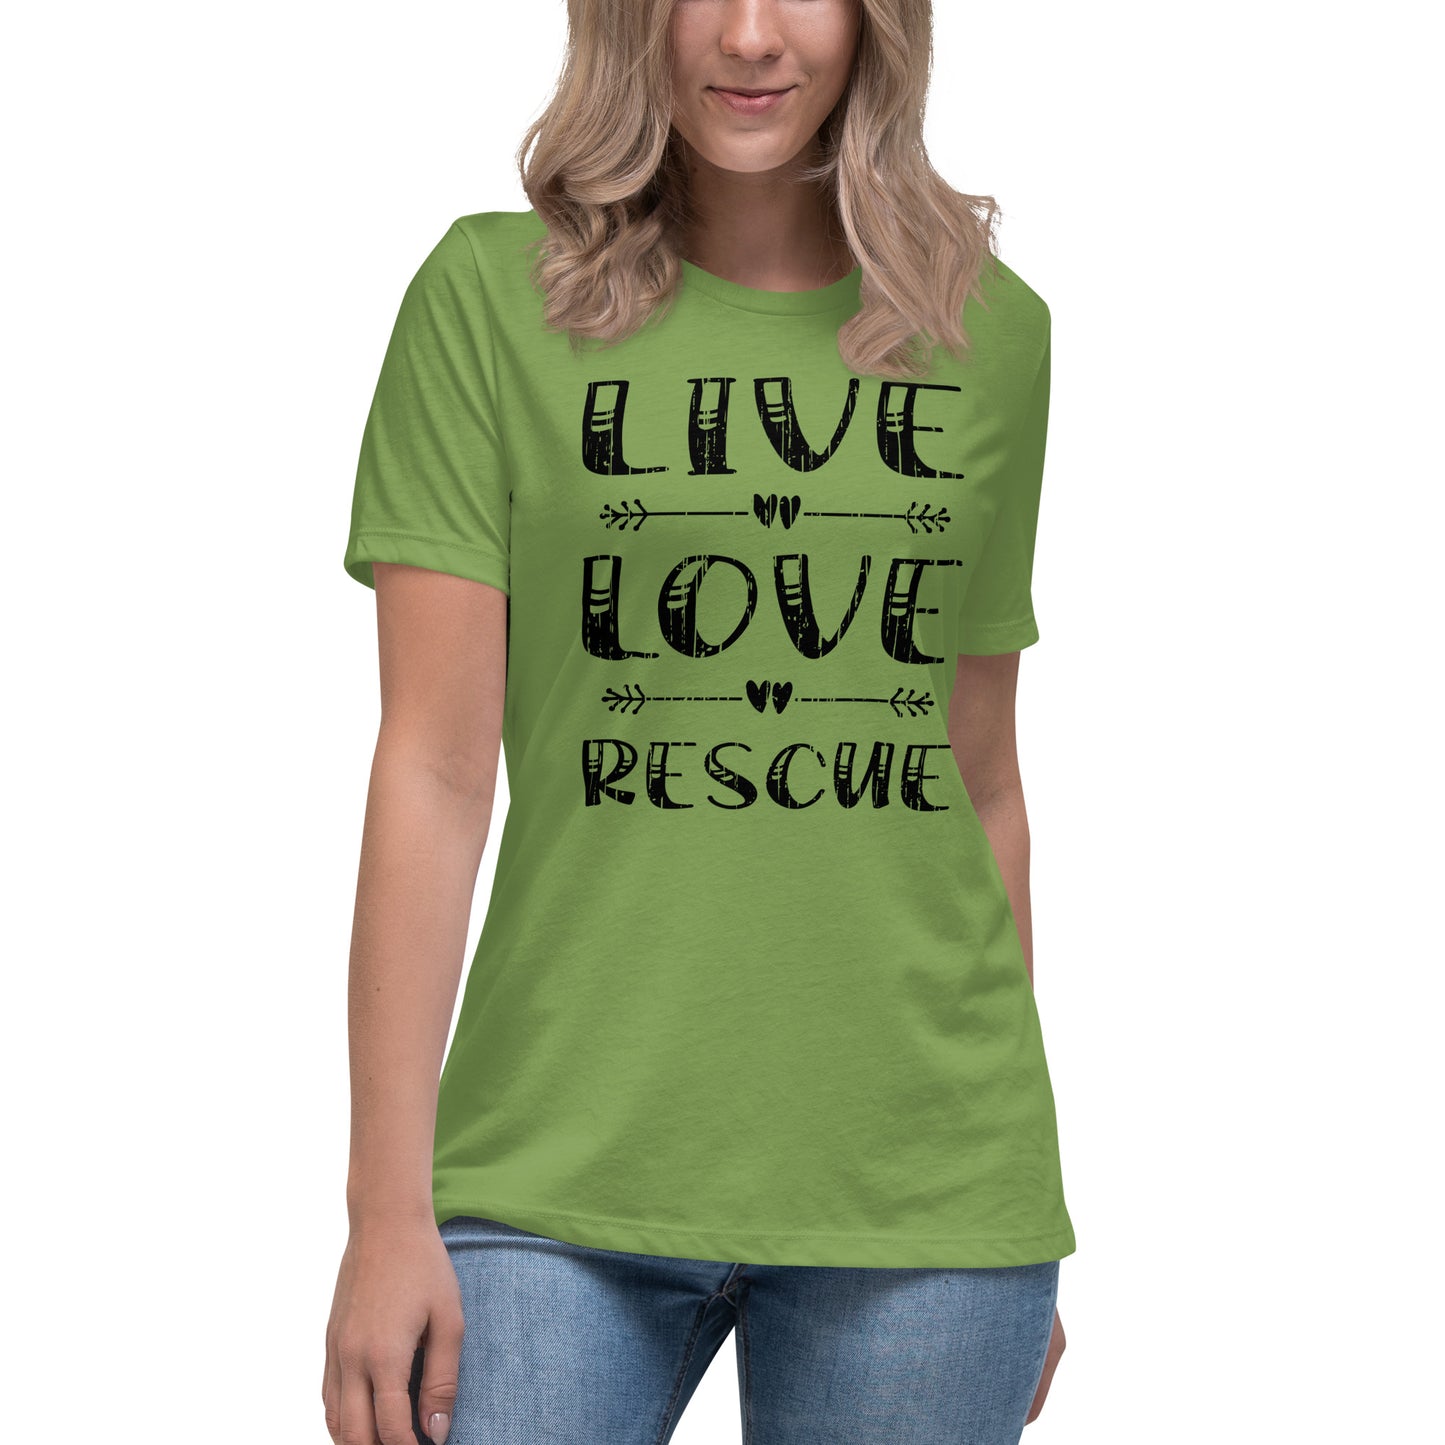 Live love rescue women’s relaxed fit t-shirts by Dog Artistry leaf color